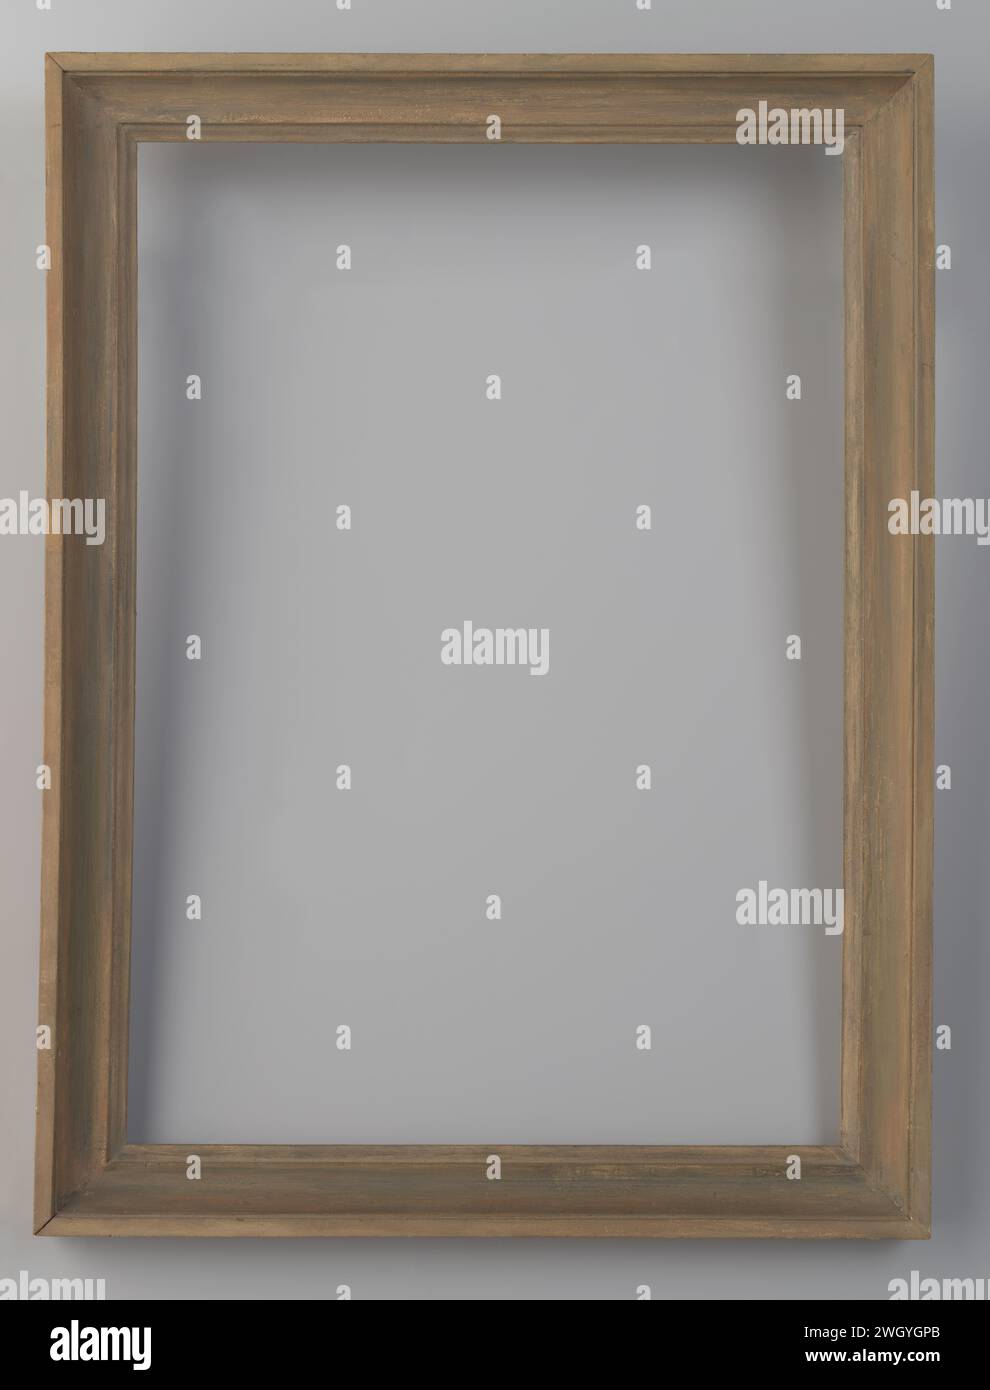 List, anonymous, c. 1946 frame   wood (plant material) Stock Photo